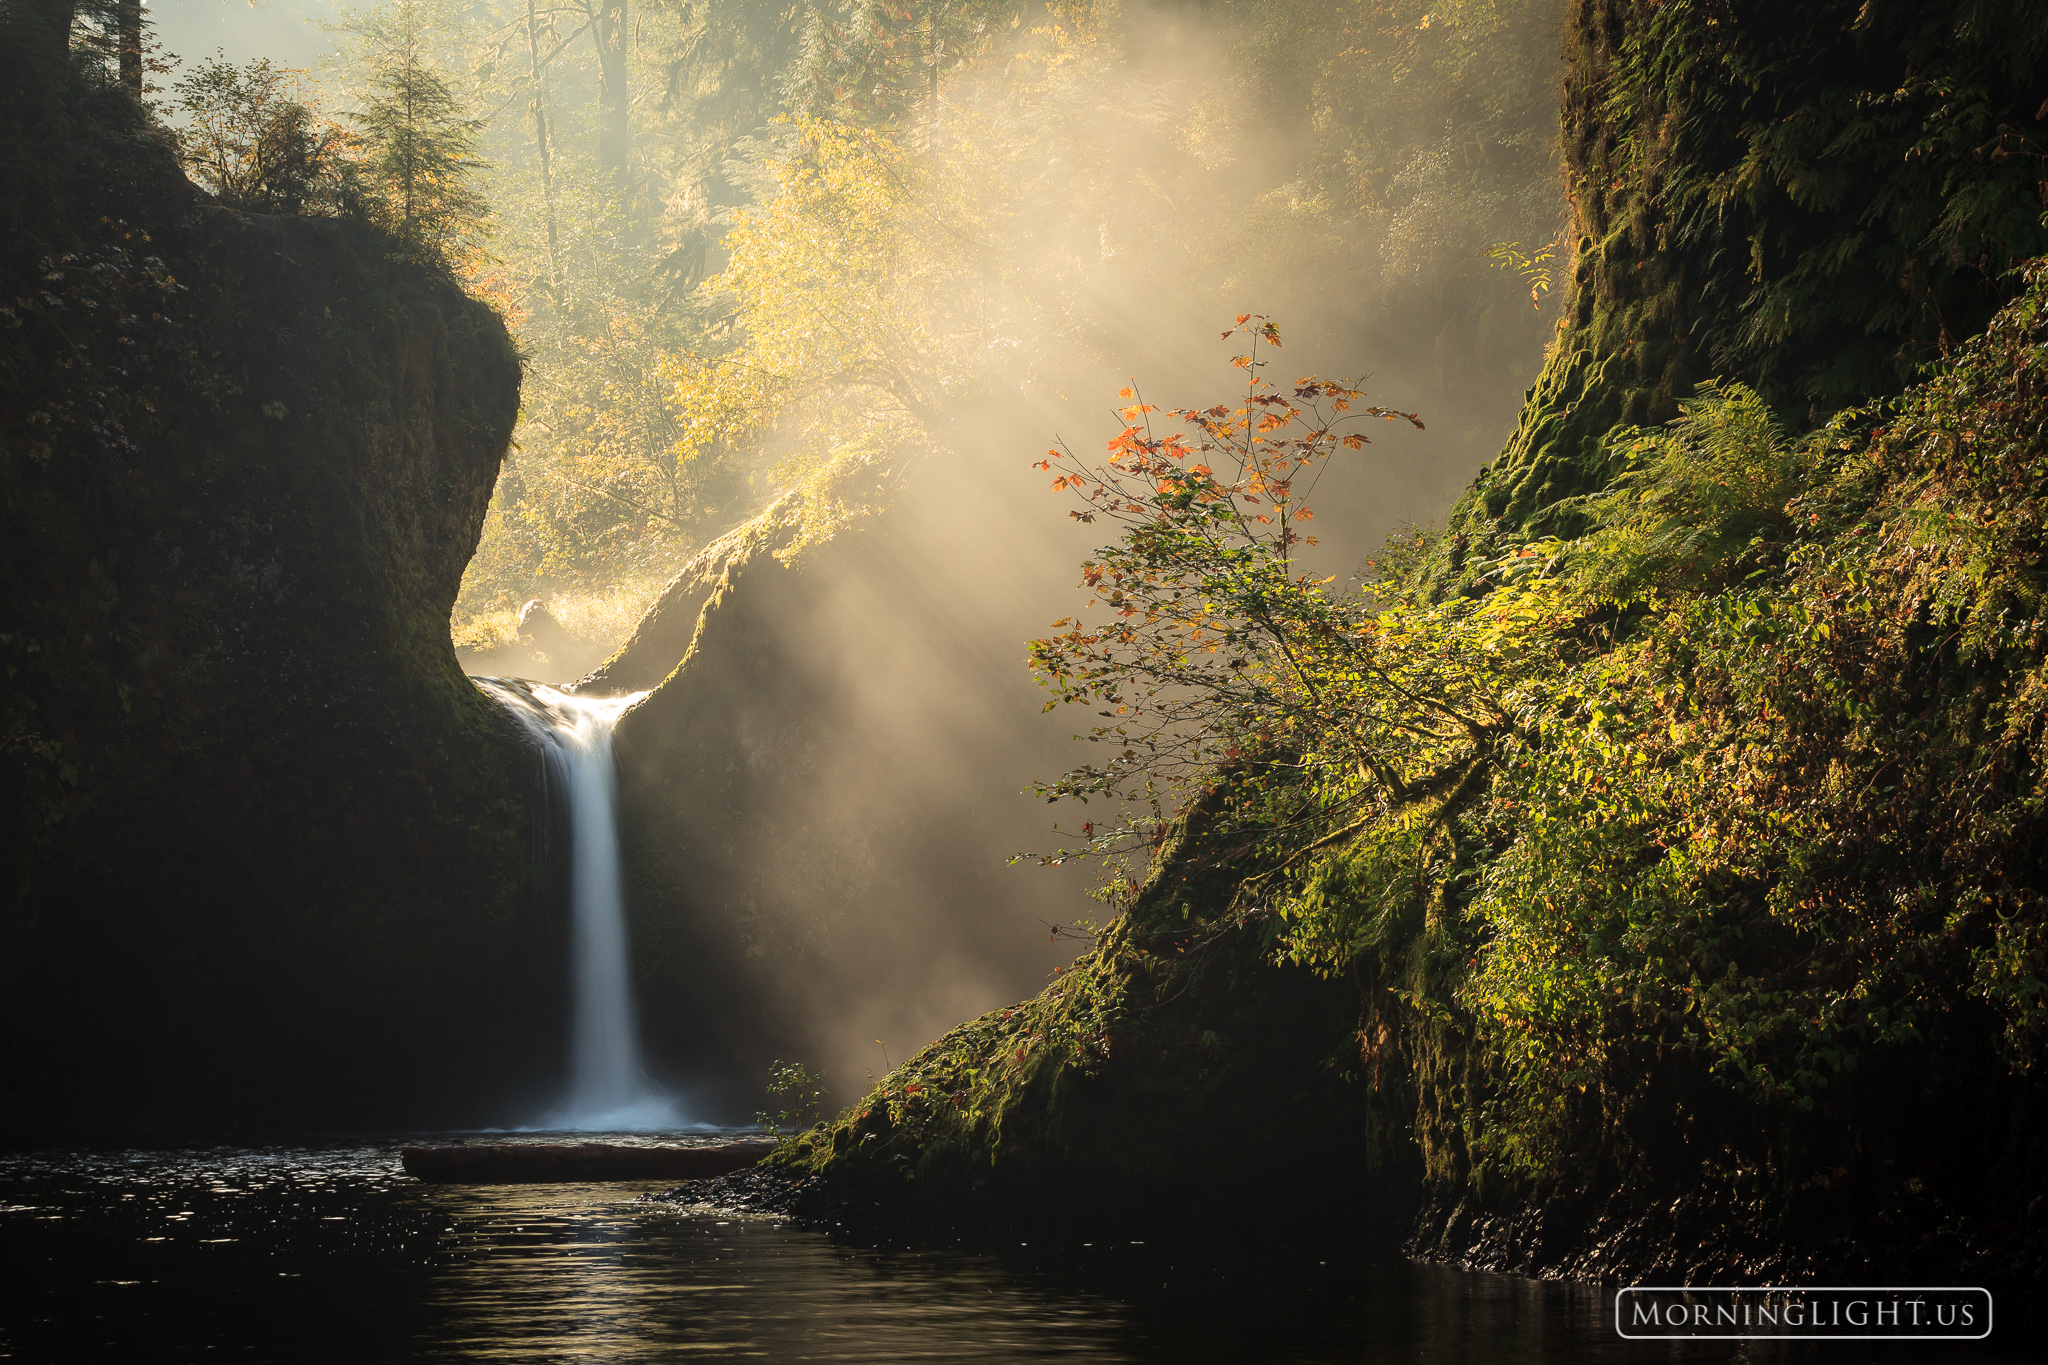 An idyllic scene in the Columbia River Gorge as mist rises over a beautiful waterfall just after the start of this new day. One...